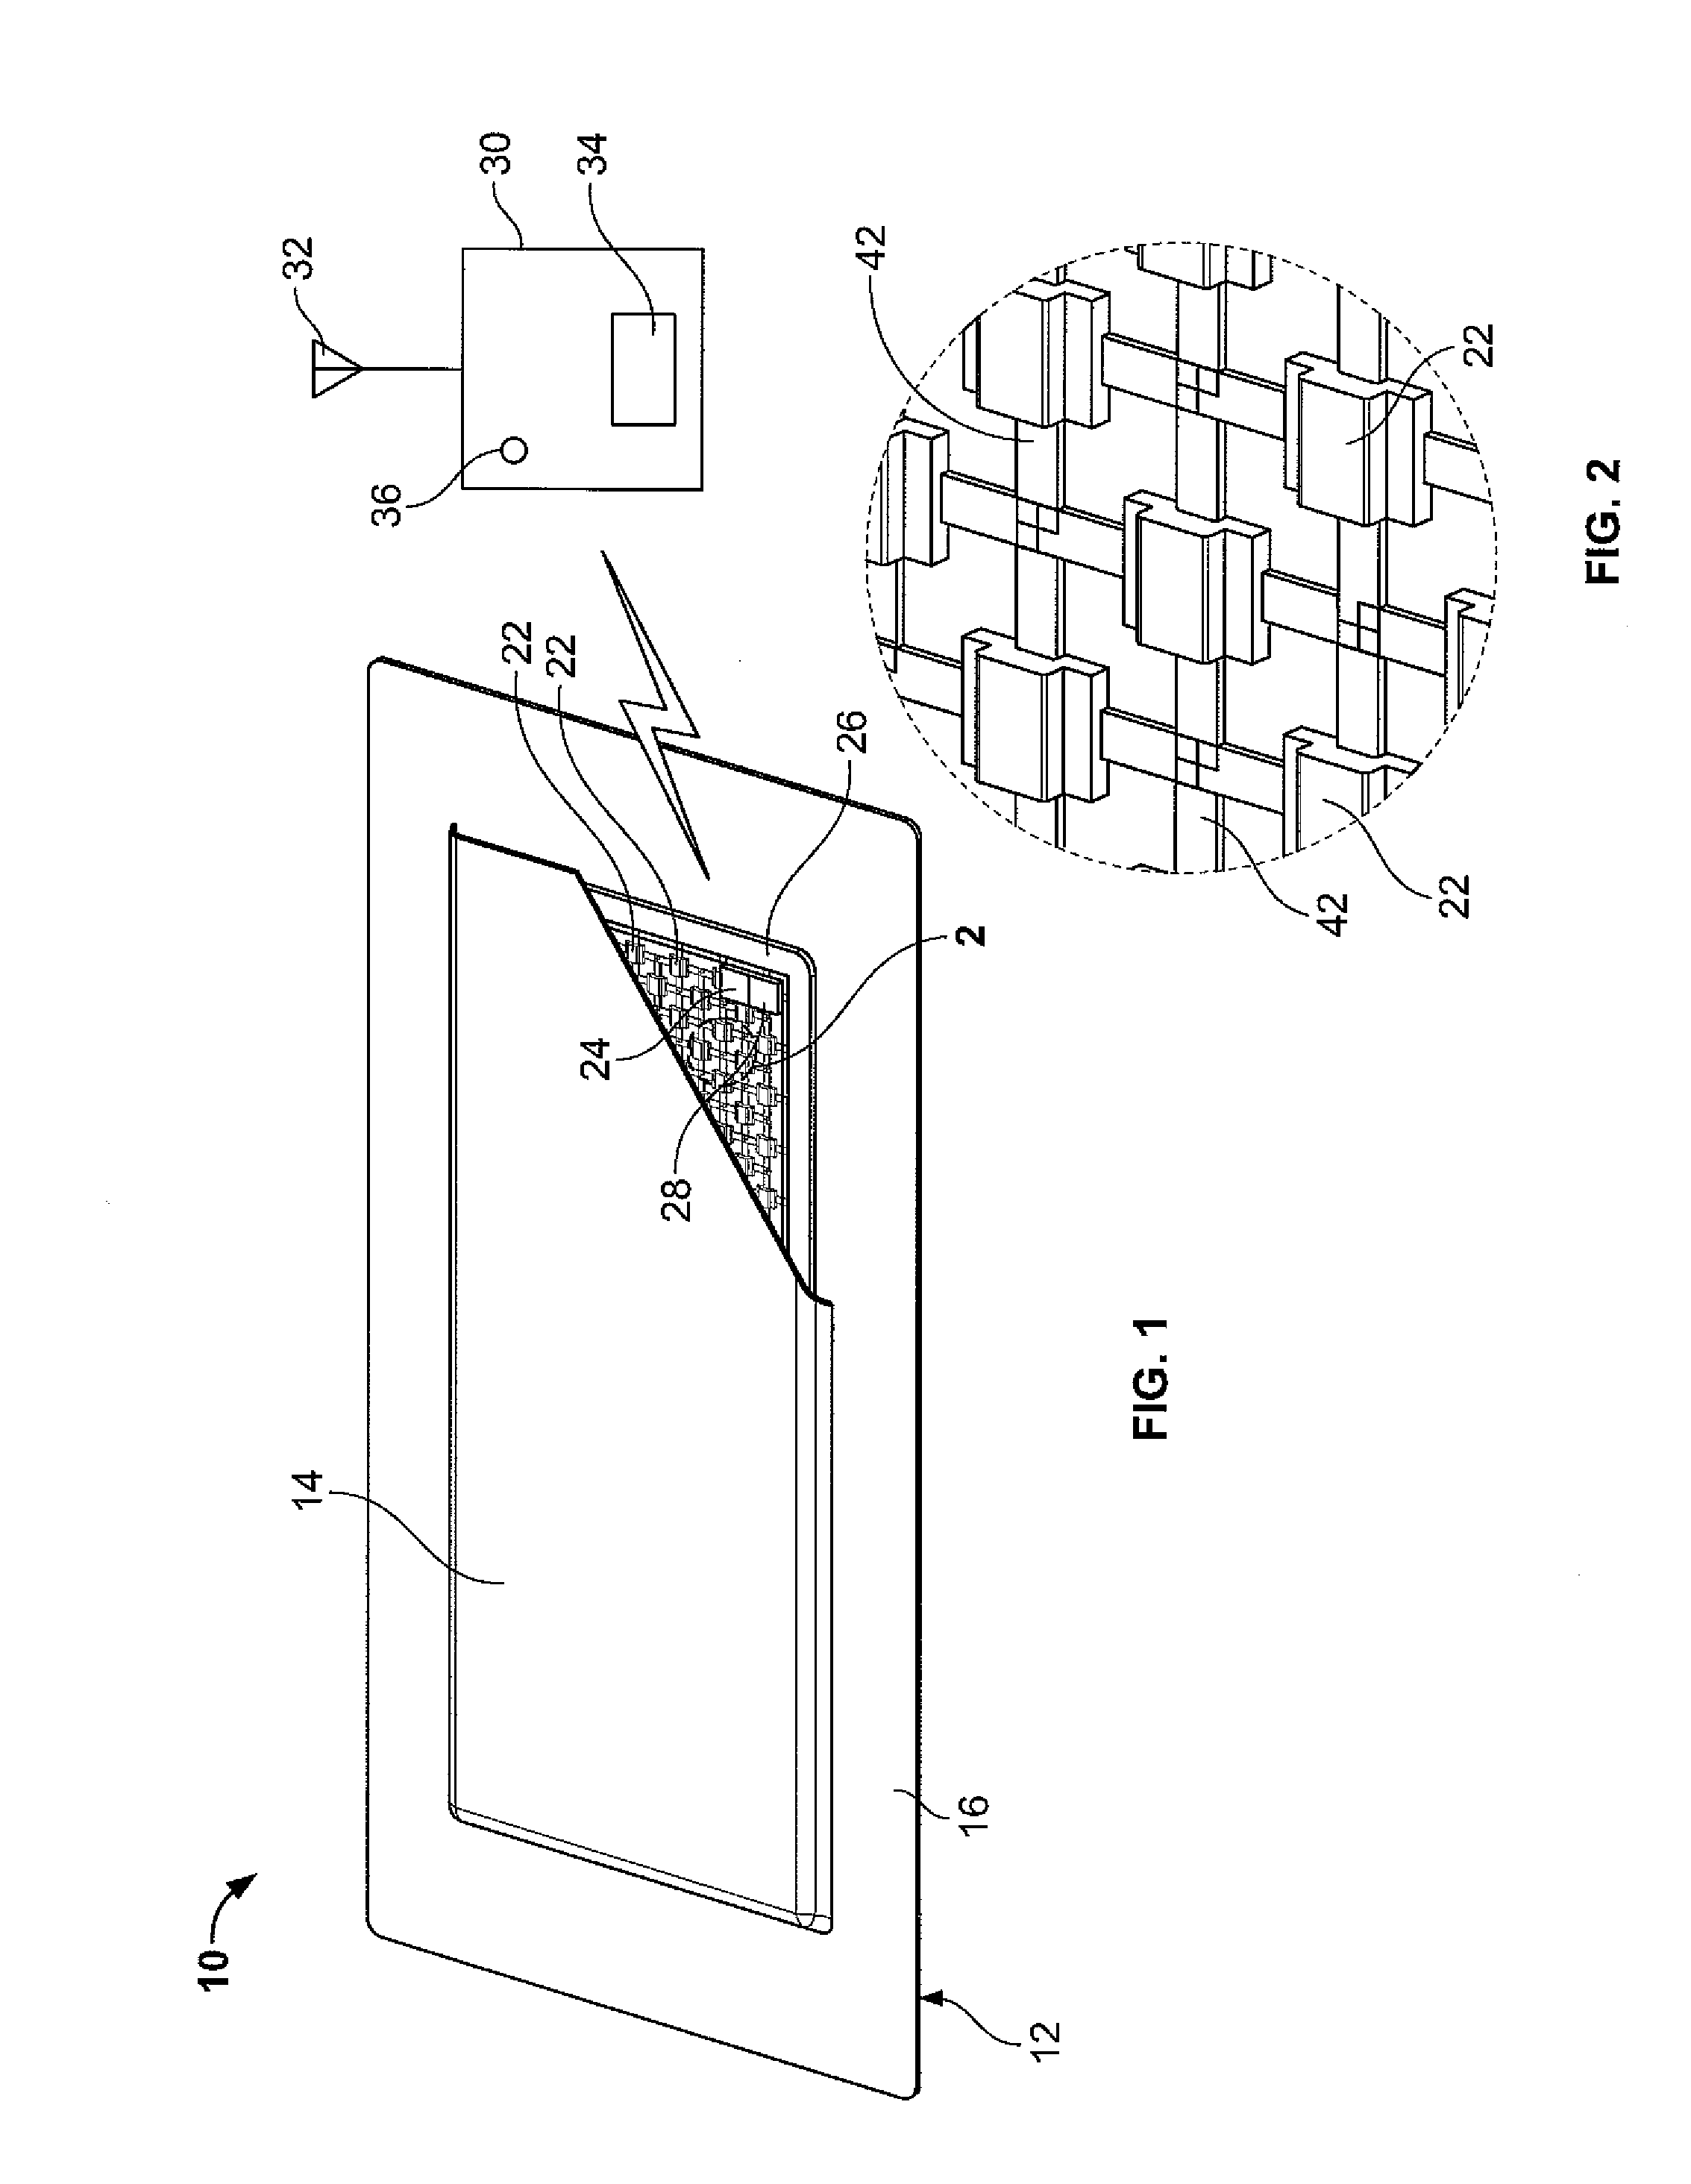 Remote monitoring diaper system, kit and method of using